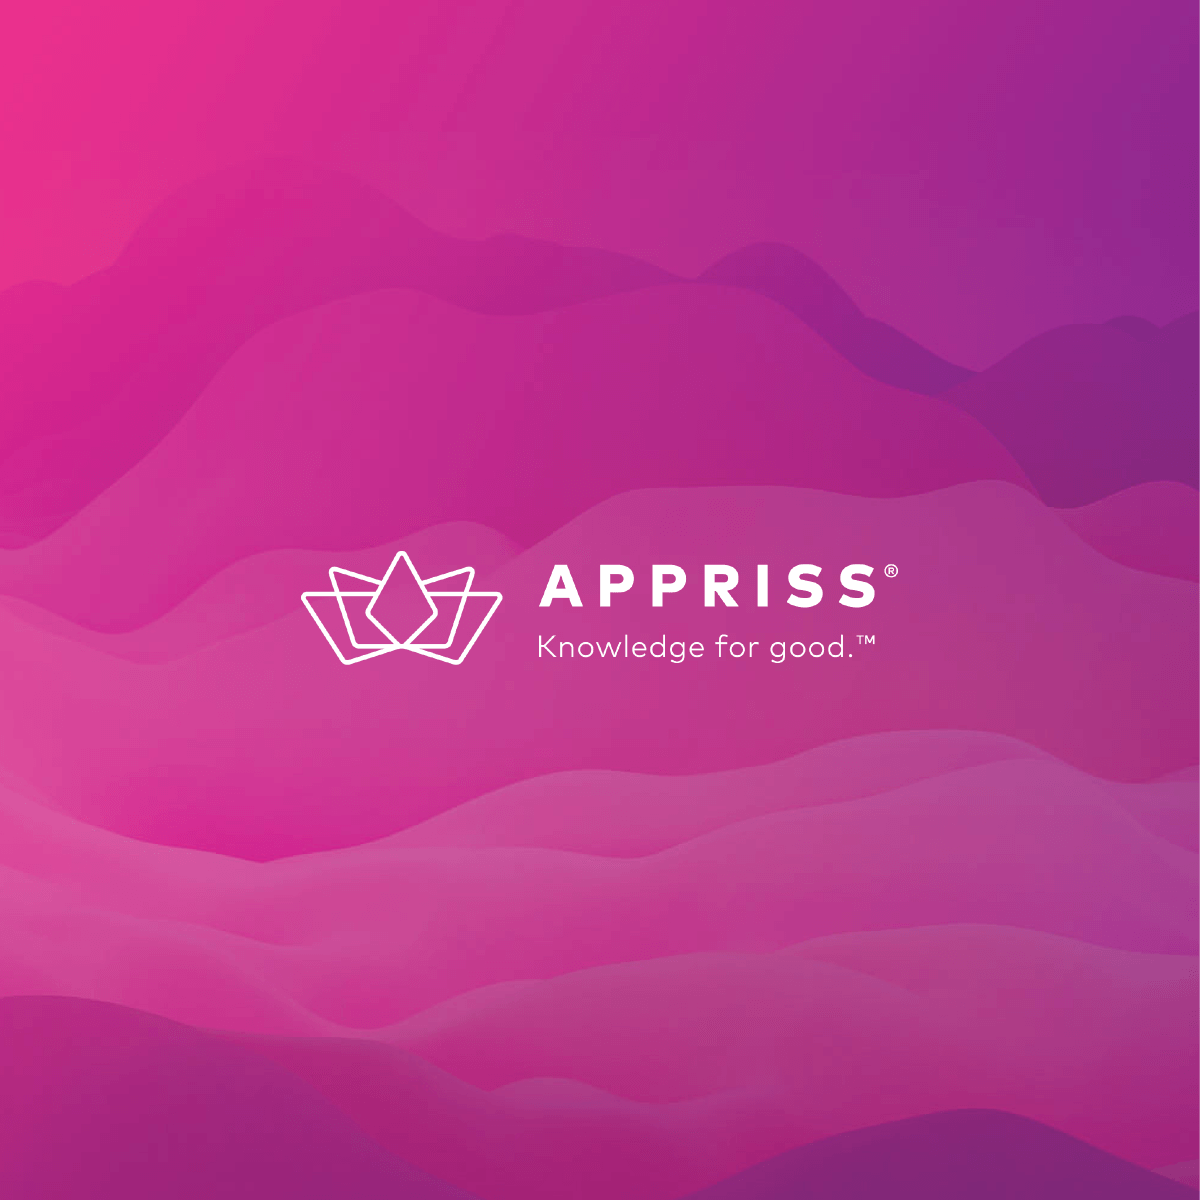 Appriss Logo - Appriss Home - Appriss is data and analytics, creating knowledge for ...